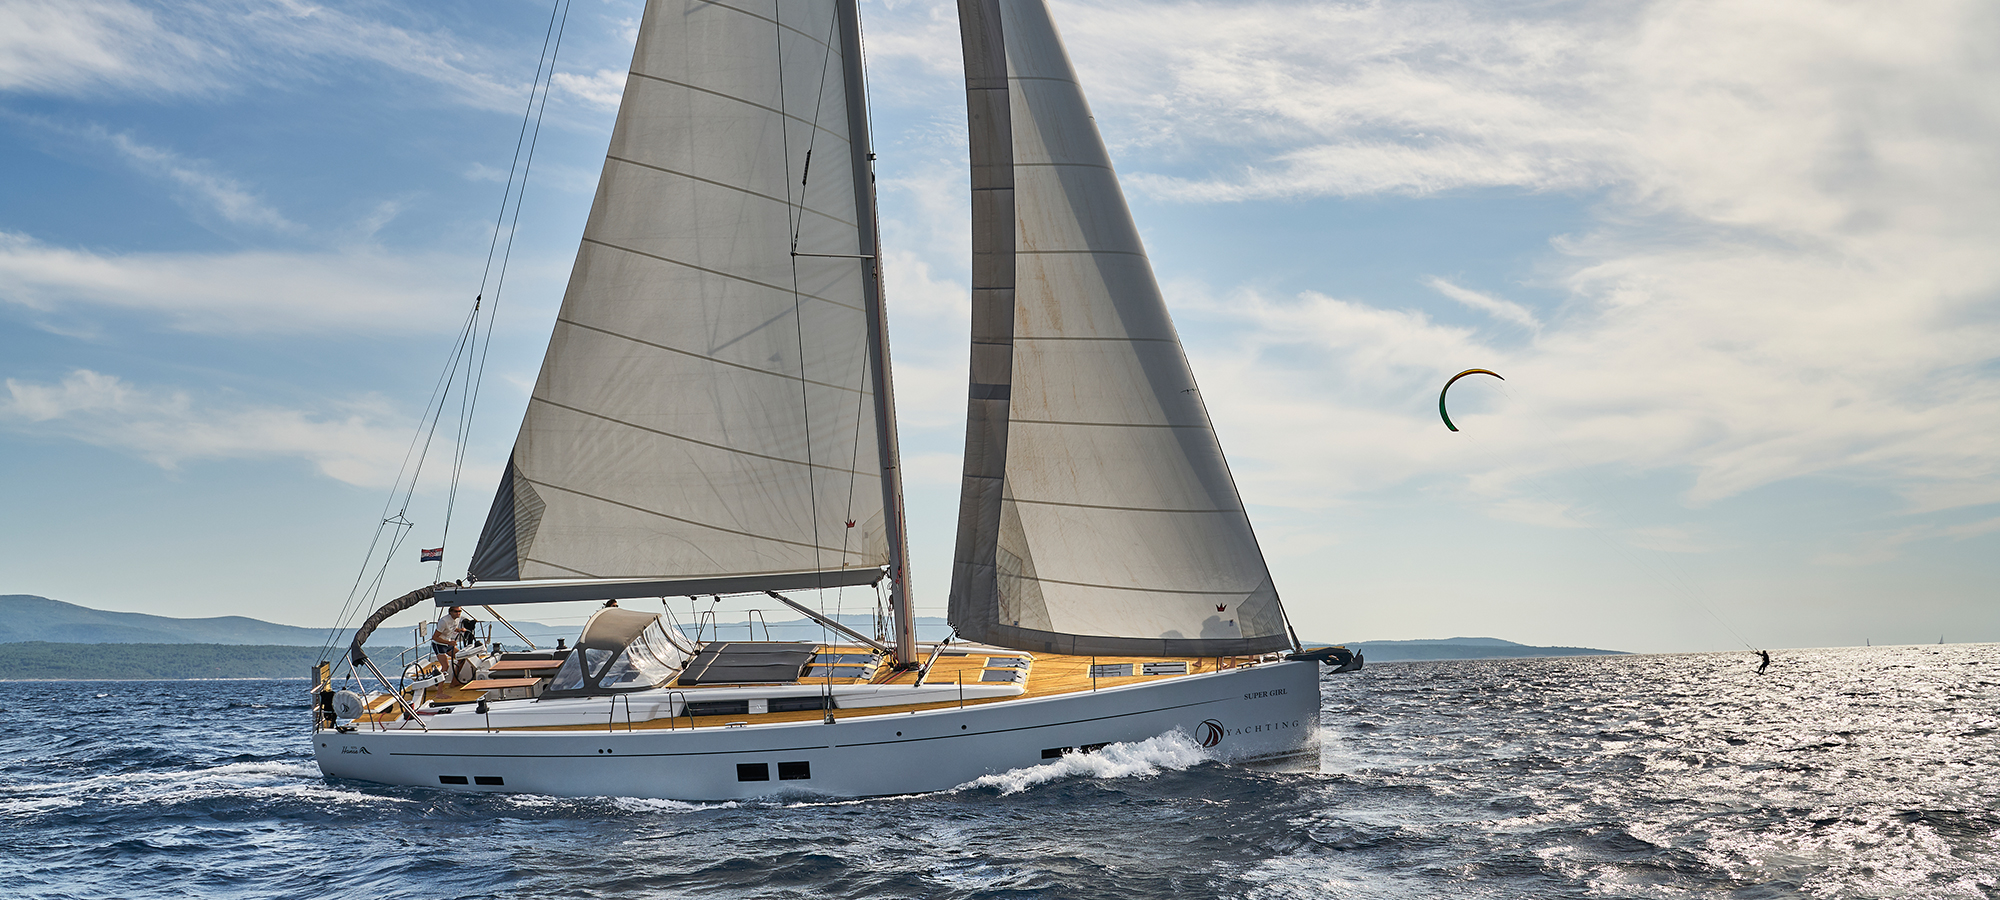 Top 10 exciting sailboats for your next sailing holiday